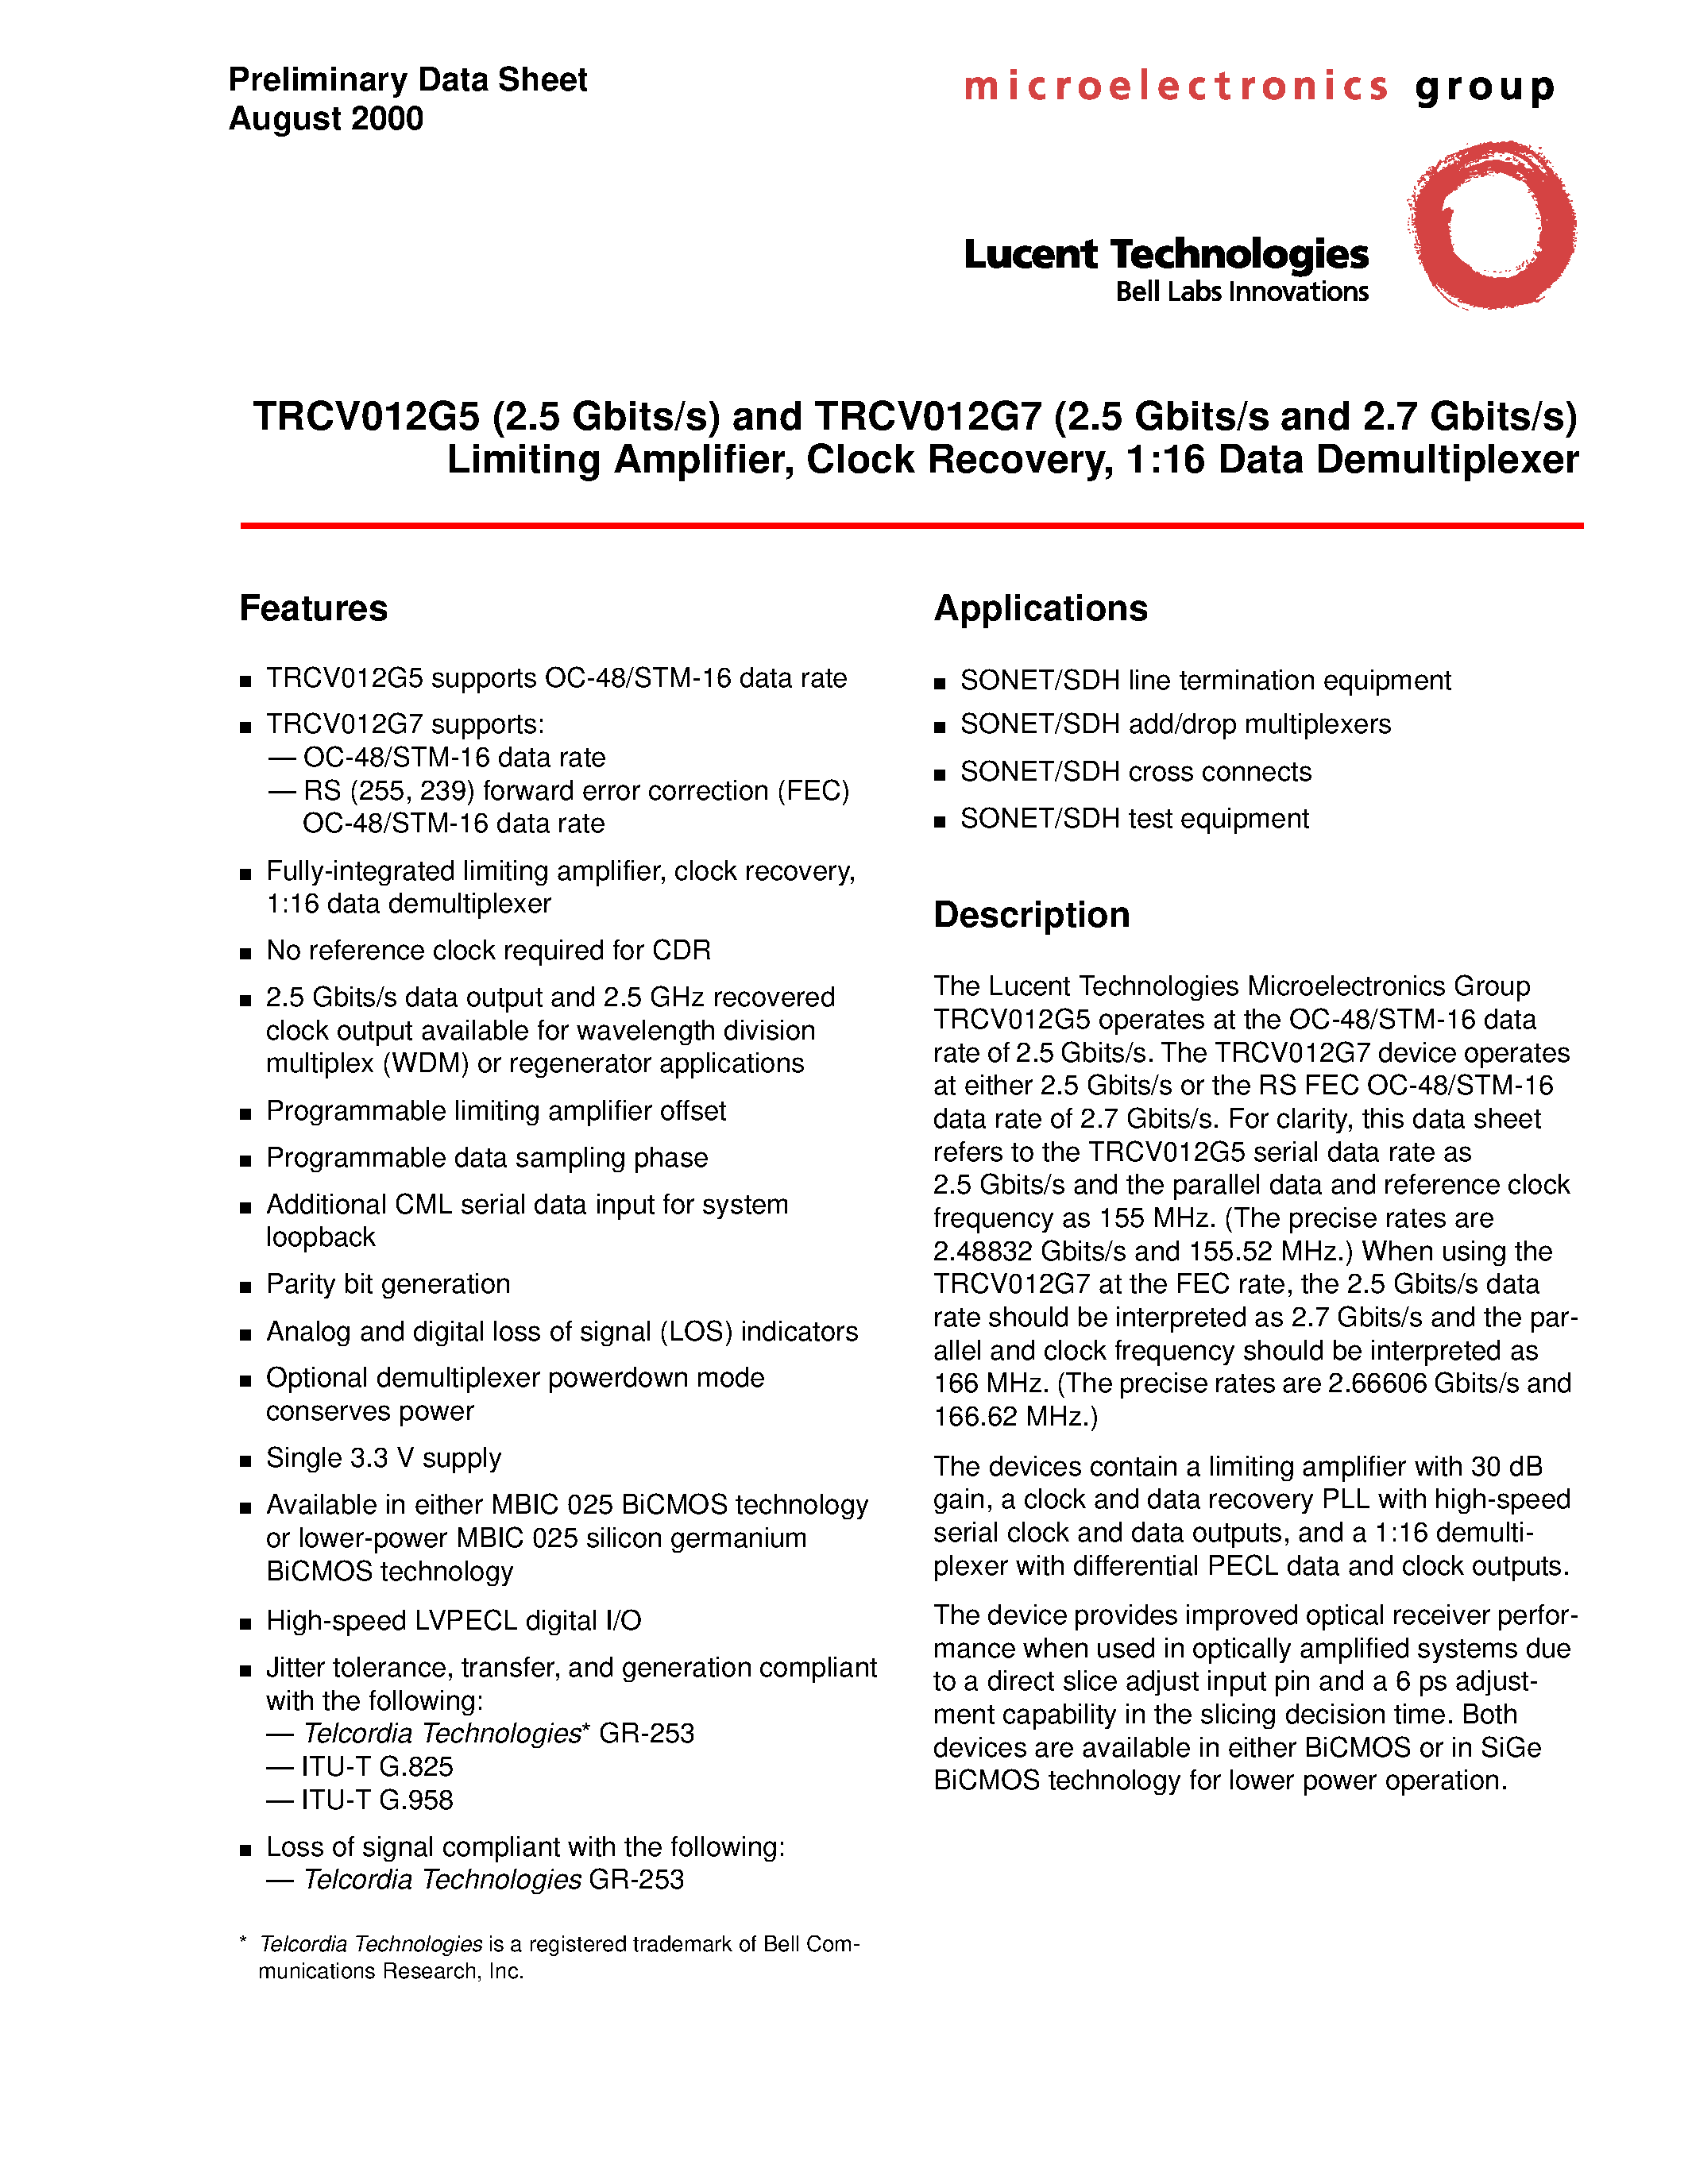 Datasheet TRCV012G53XE1 - TRCV012G5 (2.5 Gbits/s) and TRCV012G7 (2.5 Gbits/s and 2.7 Gbits/s) Limiting Amplifier/ Clock Recovery/ 1:16 Data Demultiplexer page 1